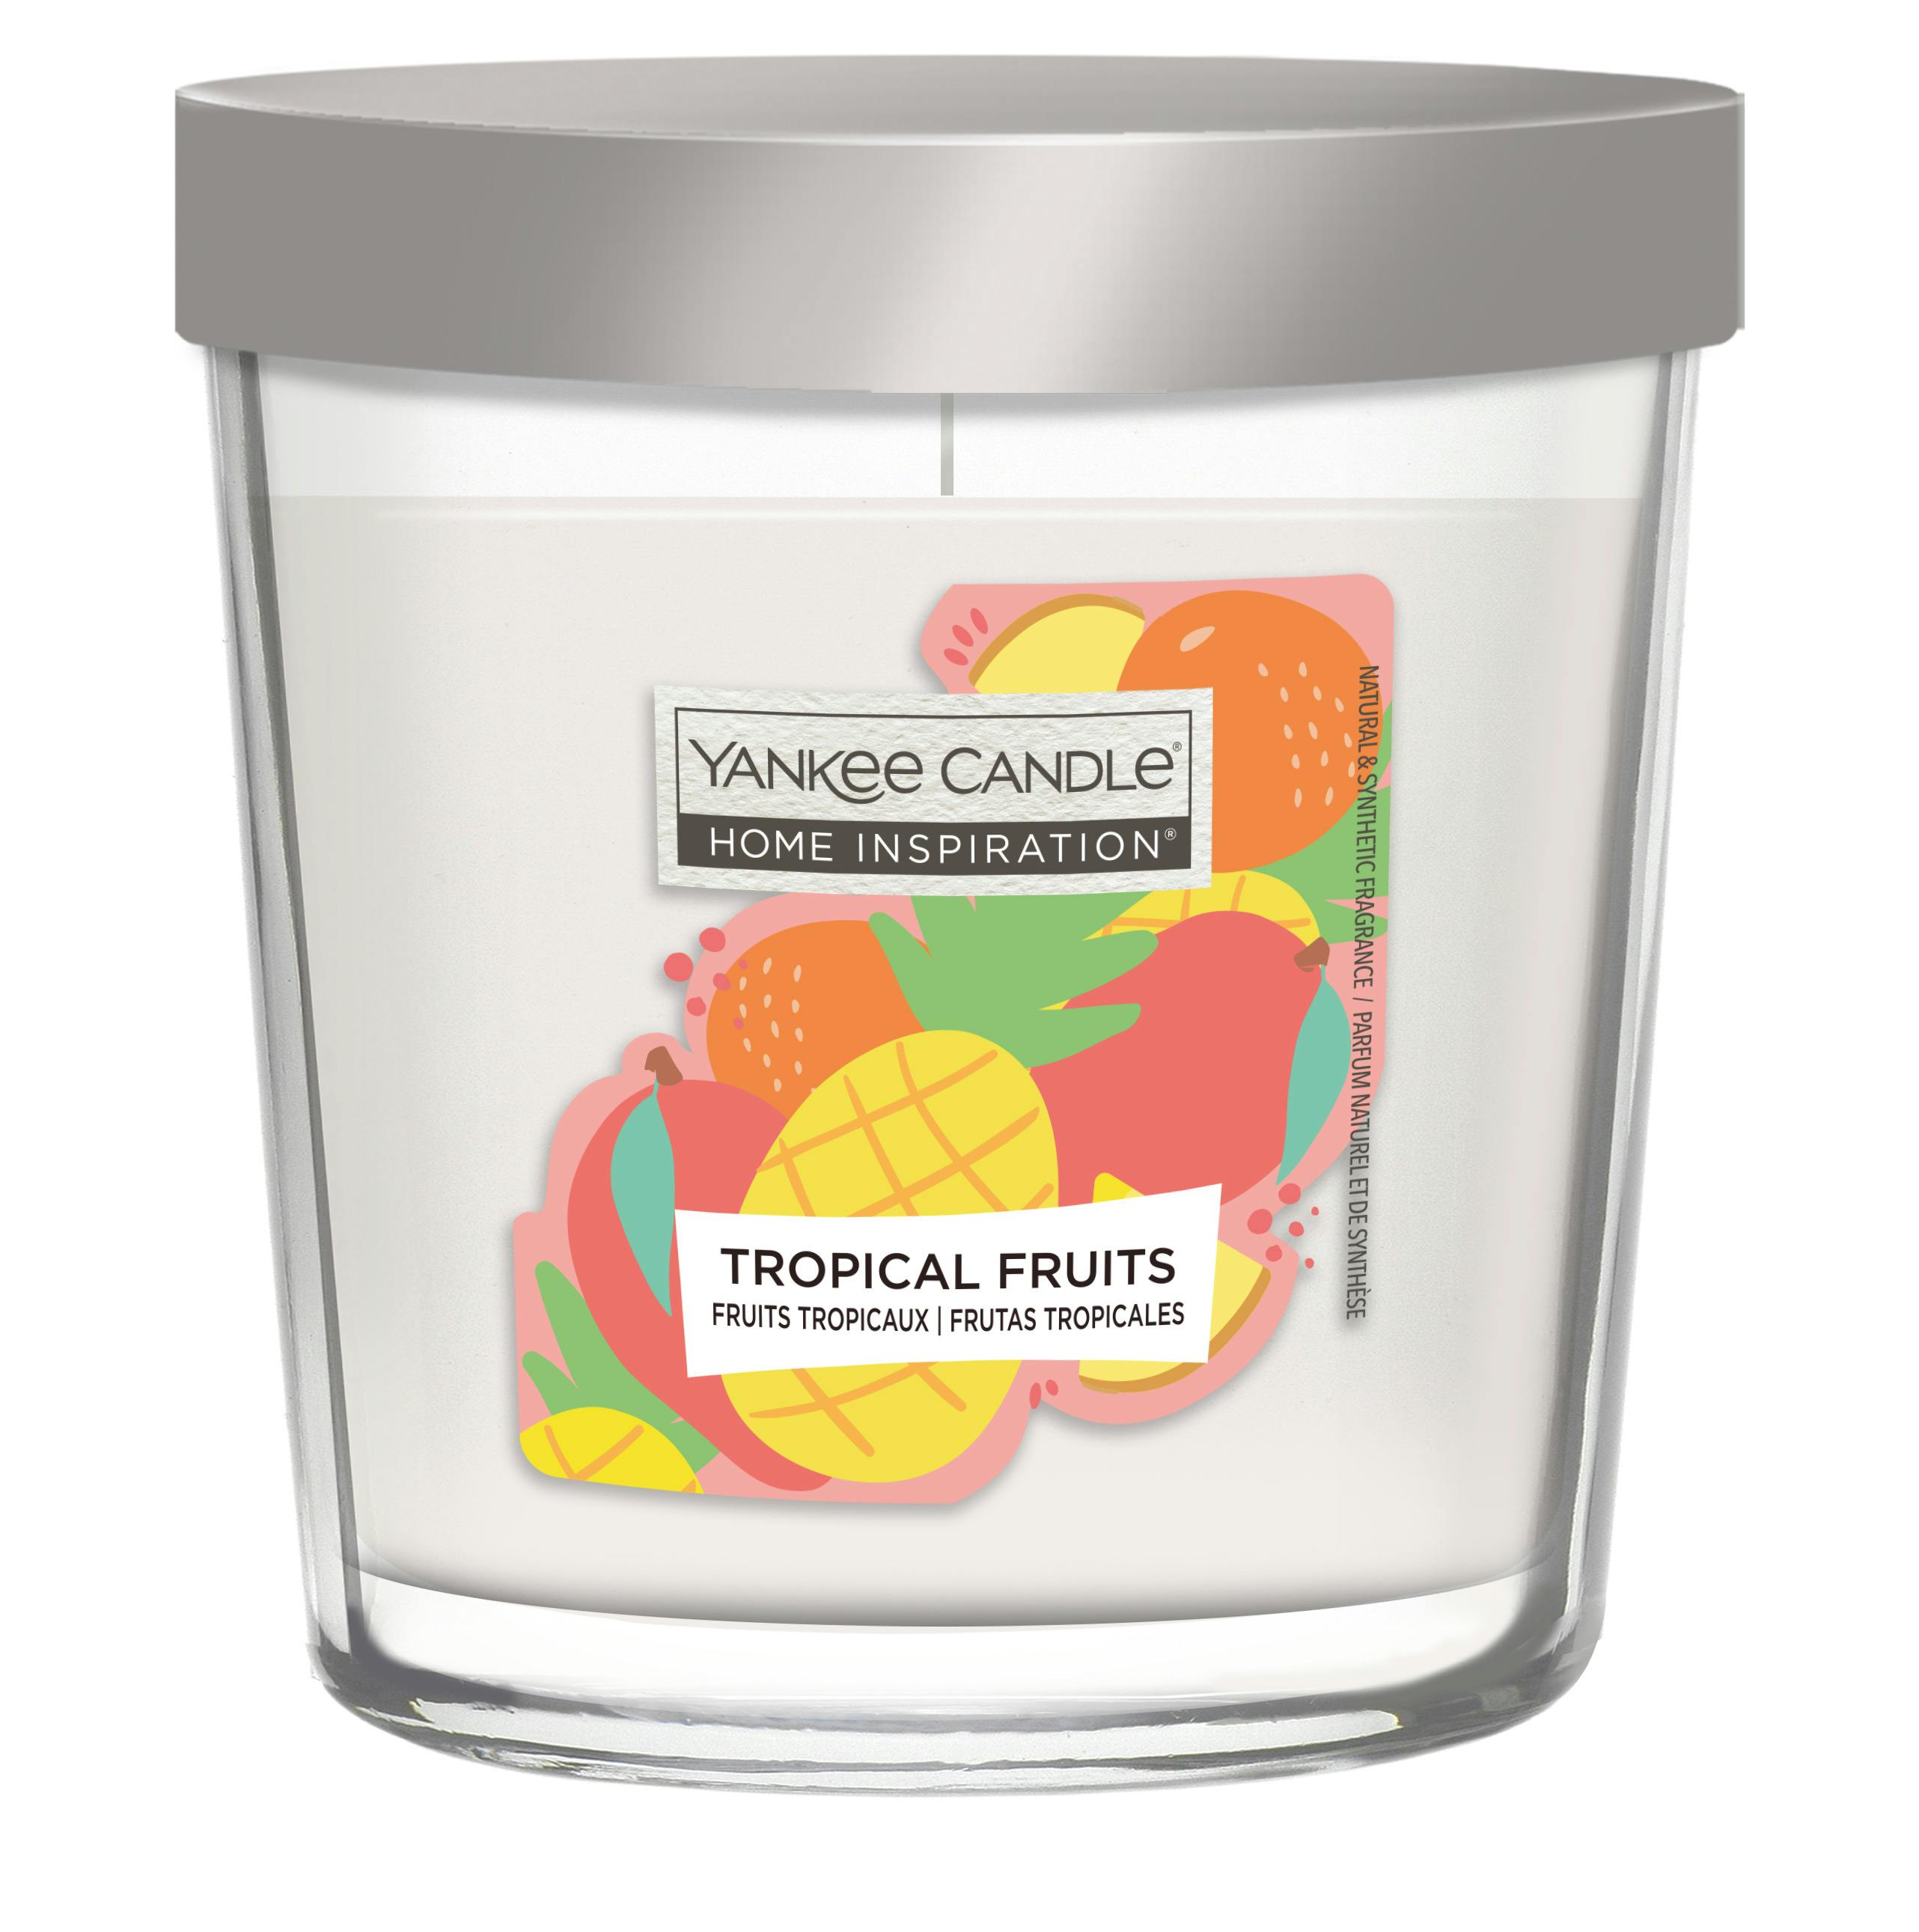 Yankee Candle Home Inspiration Tropical Fruit Tumbler 200 g